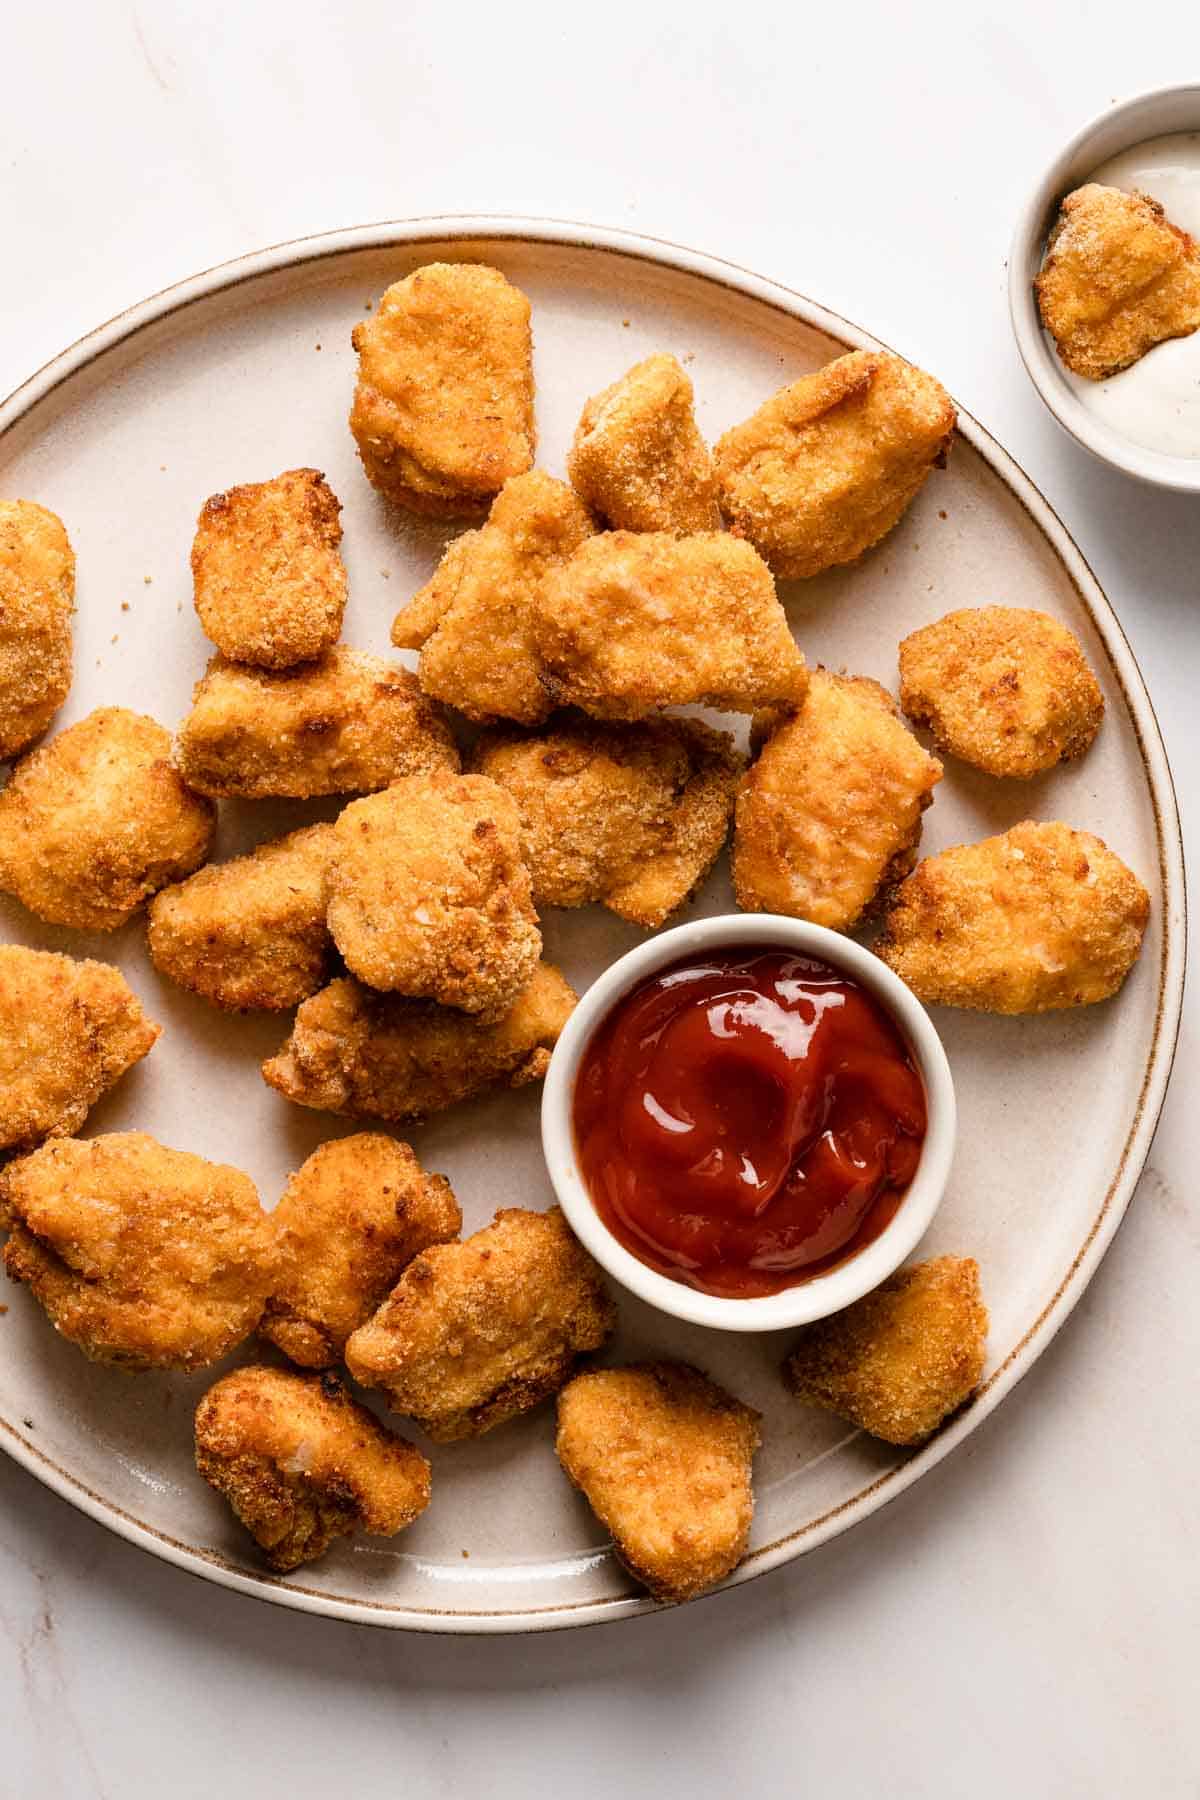 Air fryer chicken nuggets with ketchup on a plate.